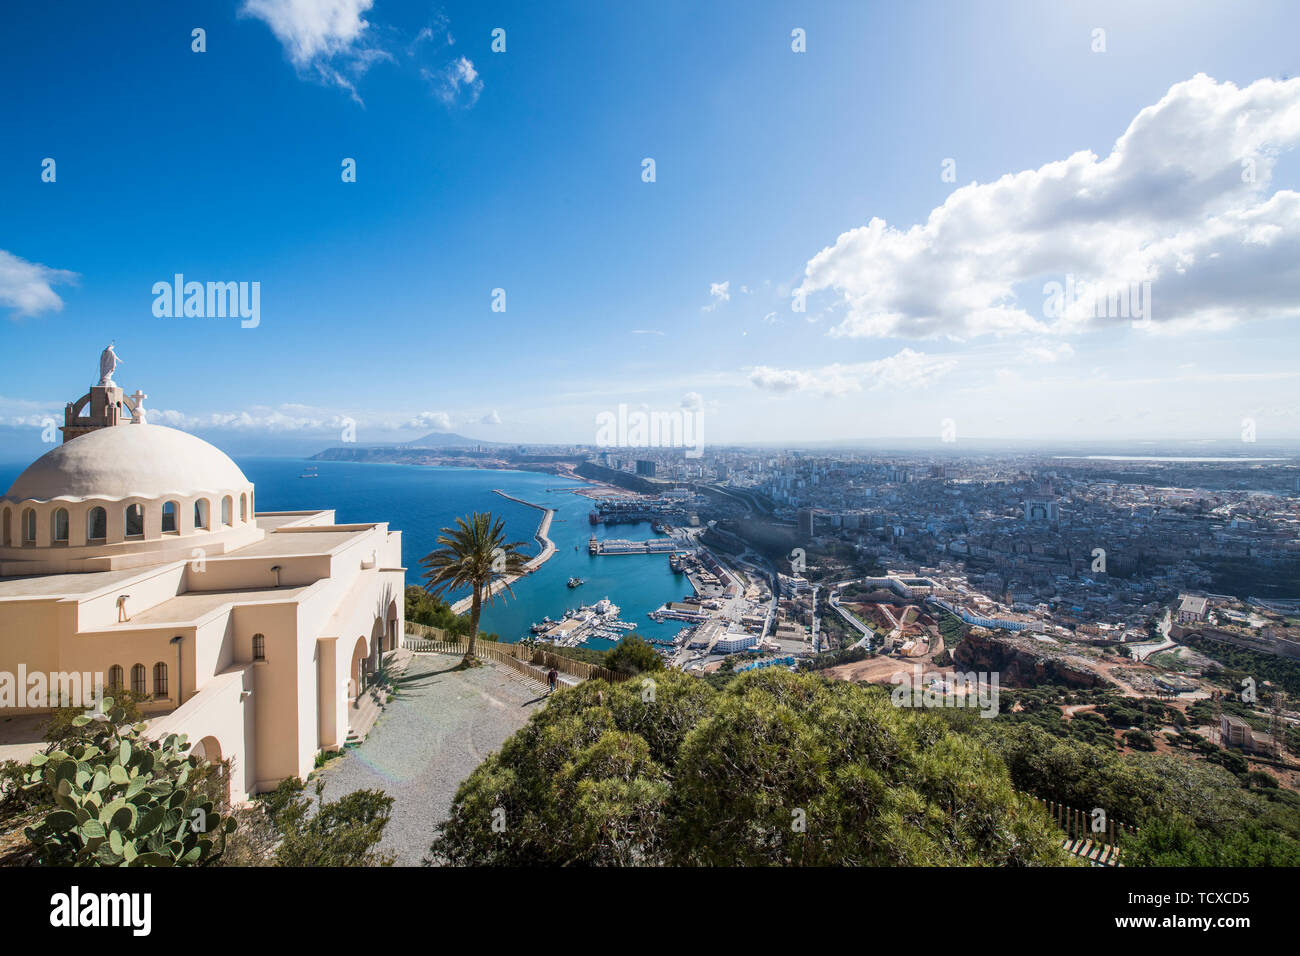 View over Oran with the Santa Cruz Cathedral in the foreground, Oran, Algeria, North Africa, Africa Stock Photo